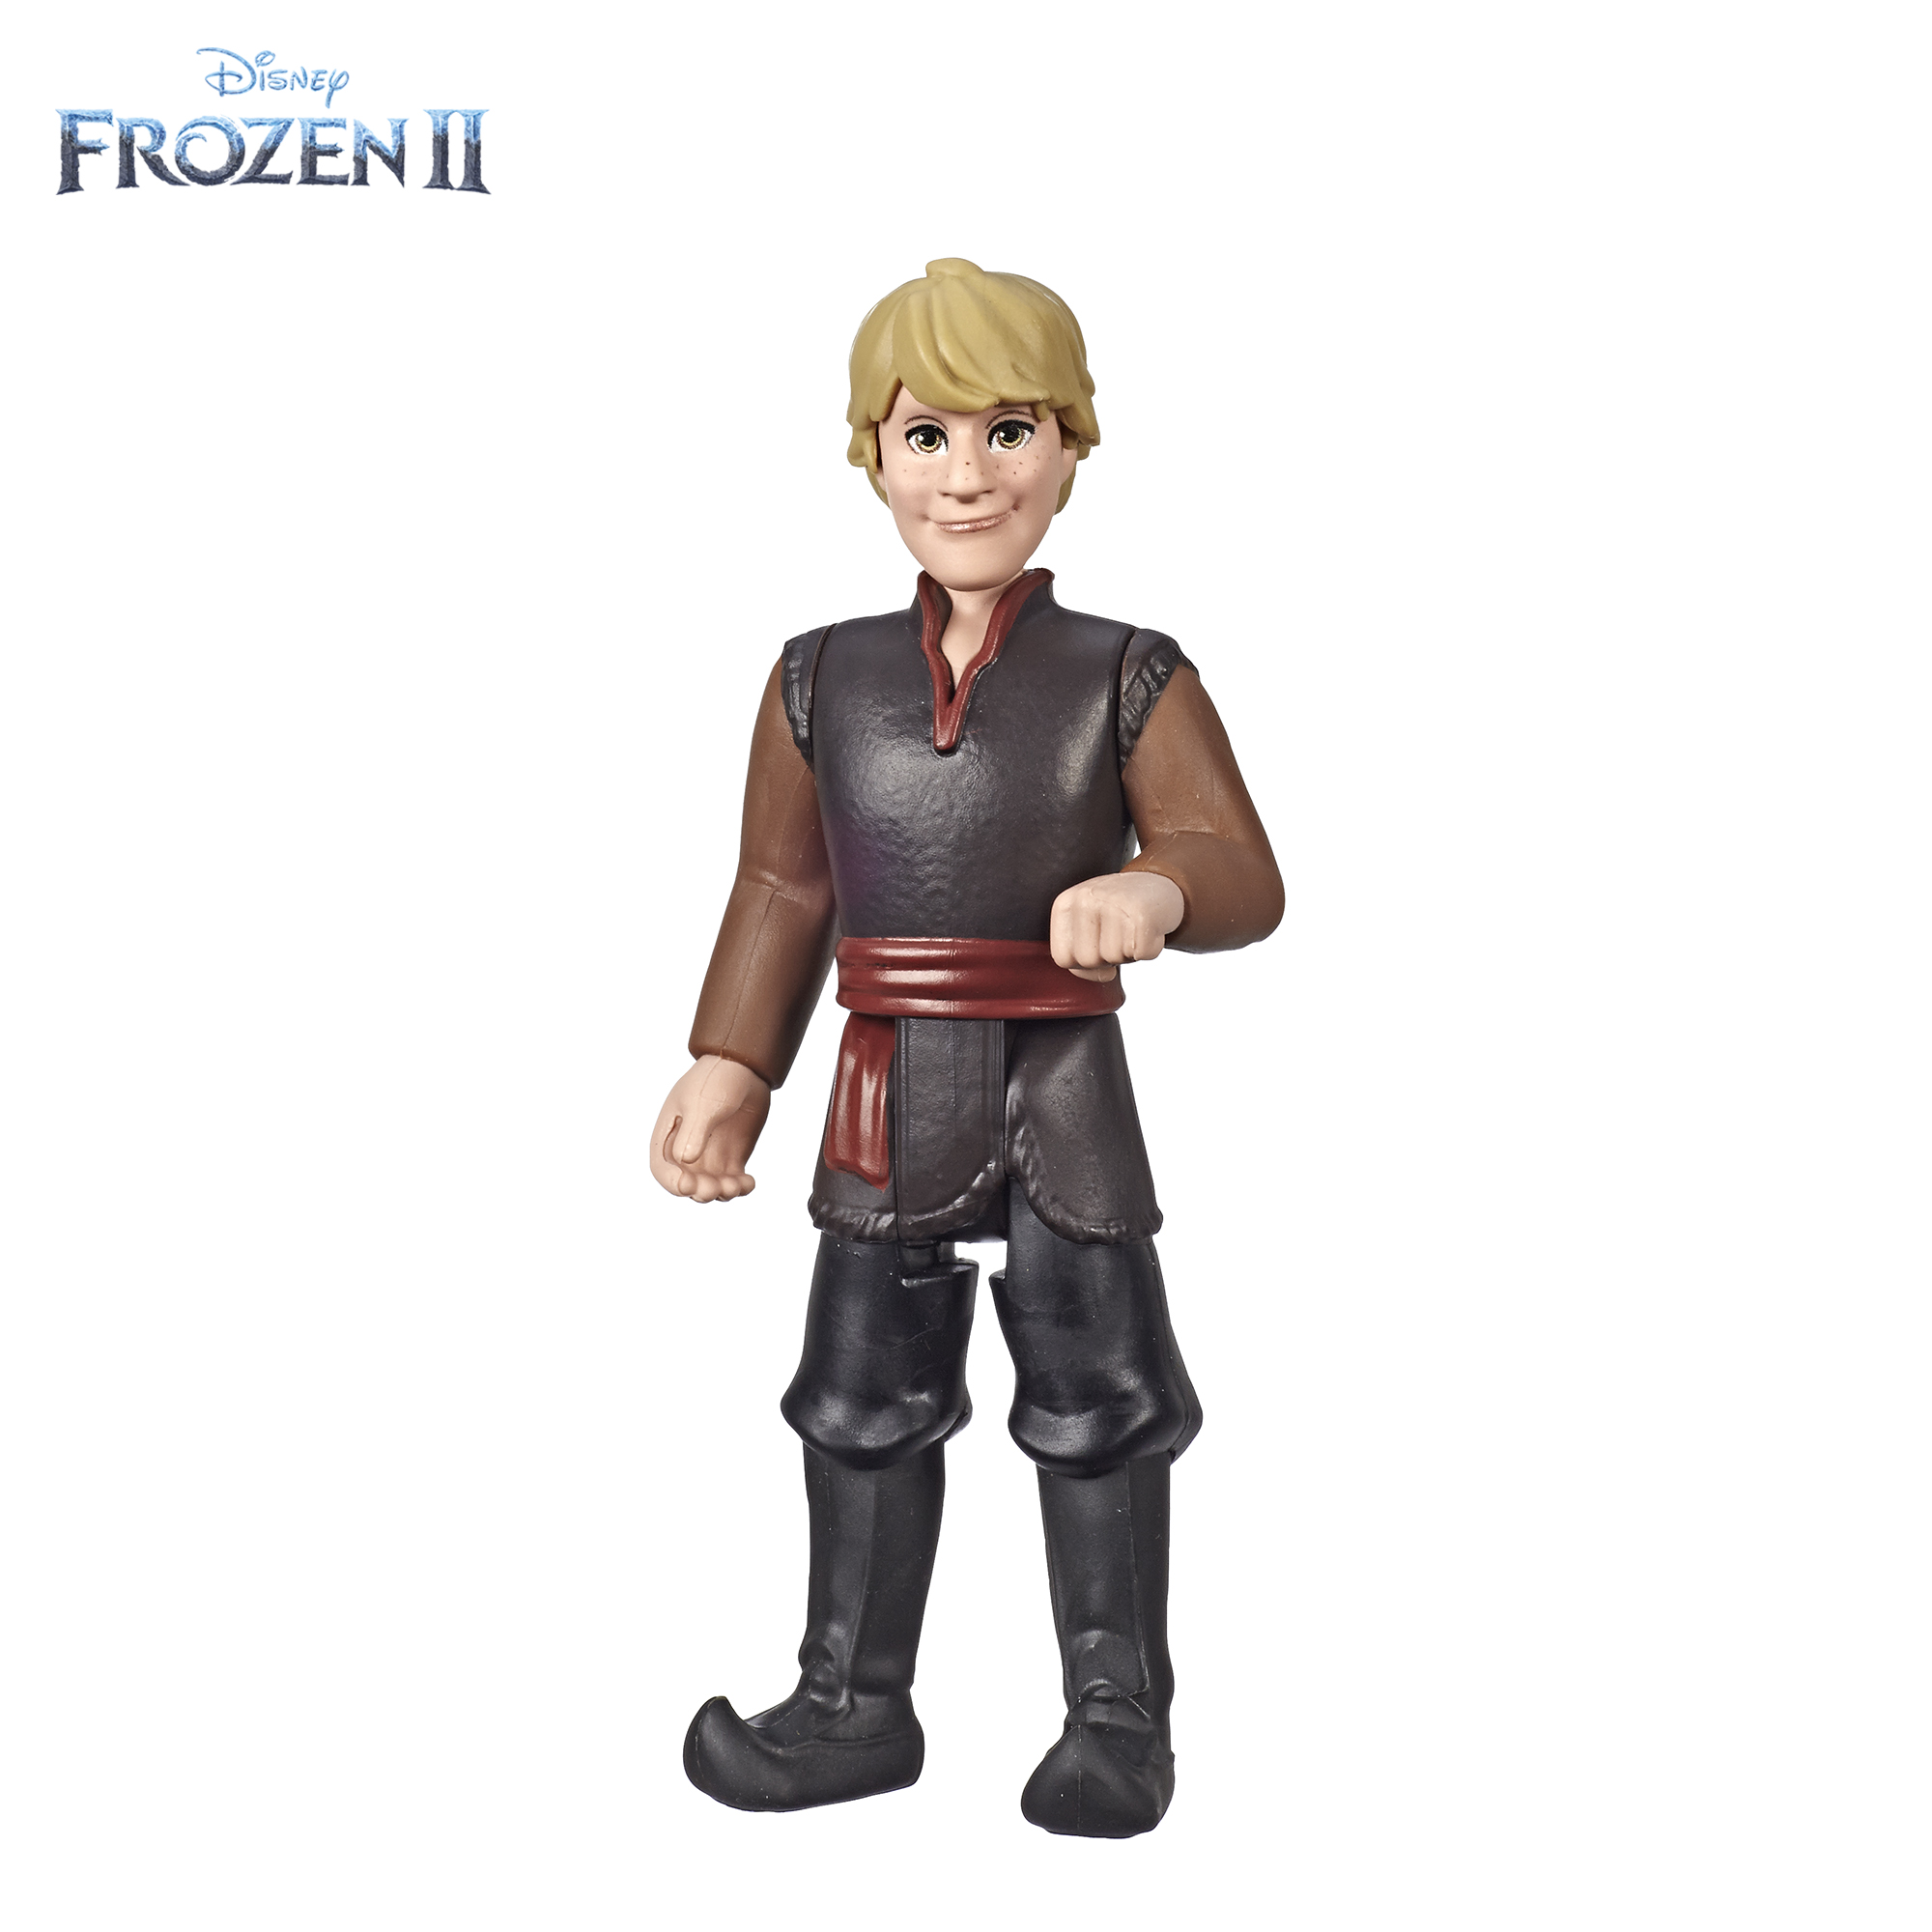 Disney Frozen 2 Small Doll Character Collection Asst. - Kristoff ...